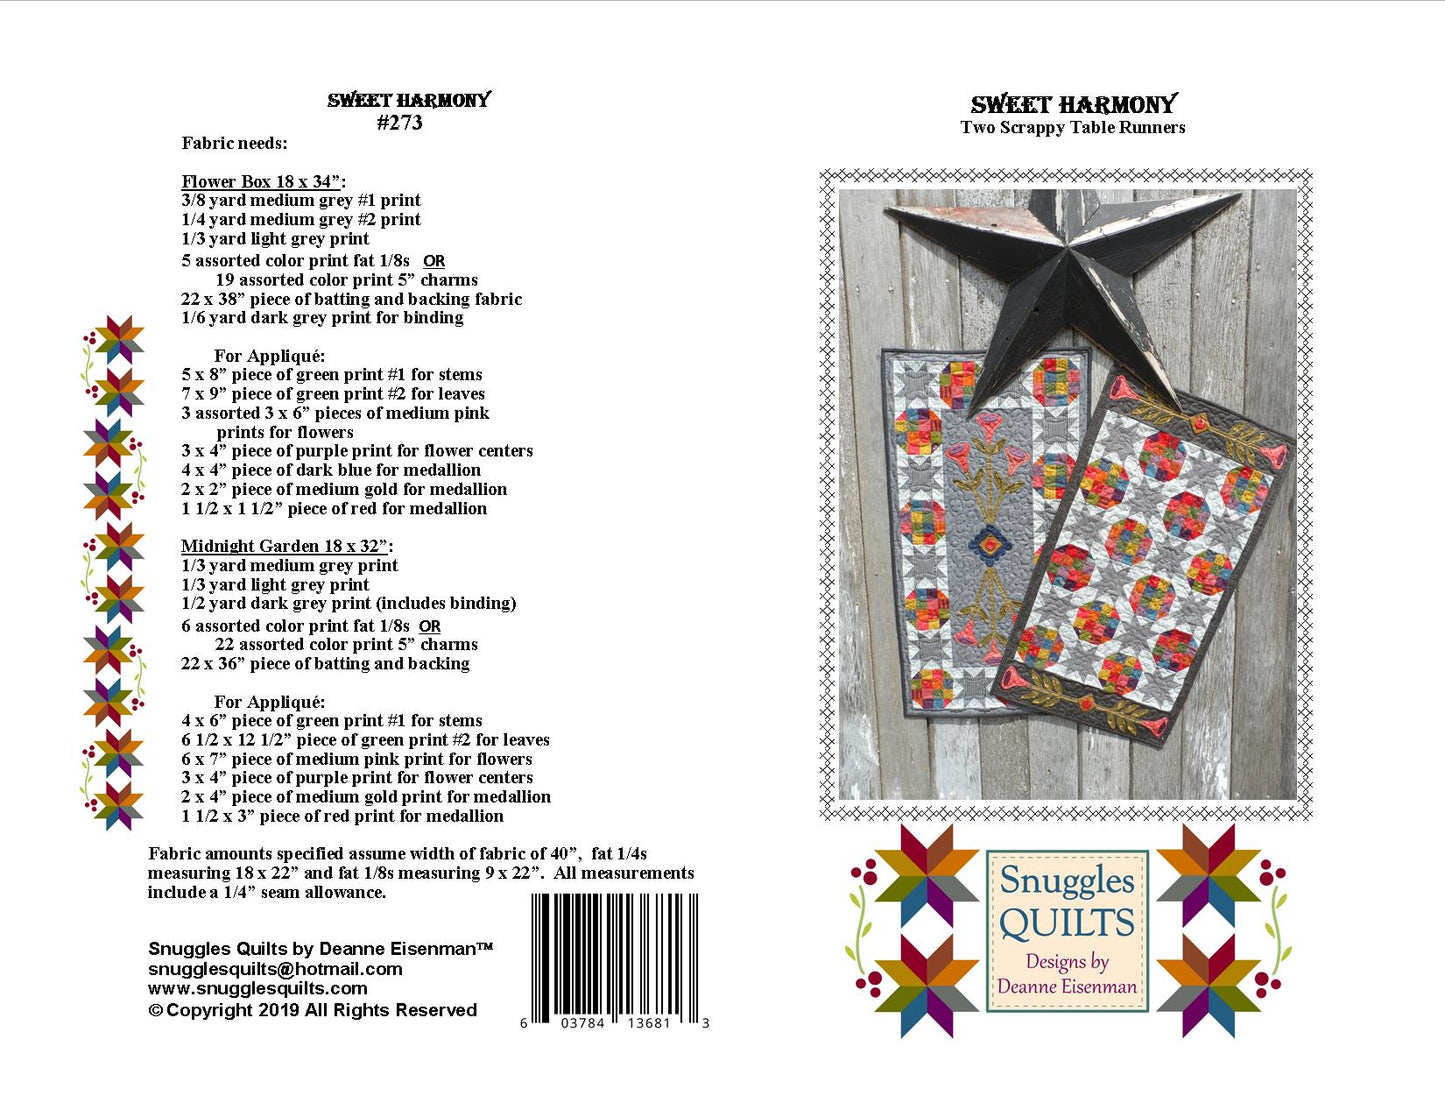 Scrappy table runner quilt pattern with applique